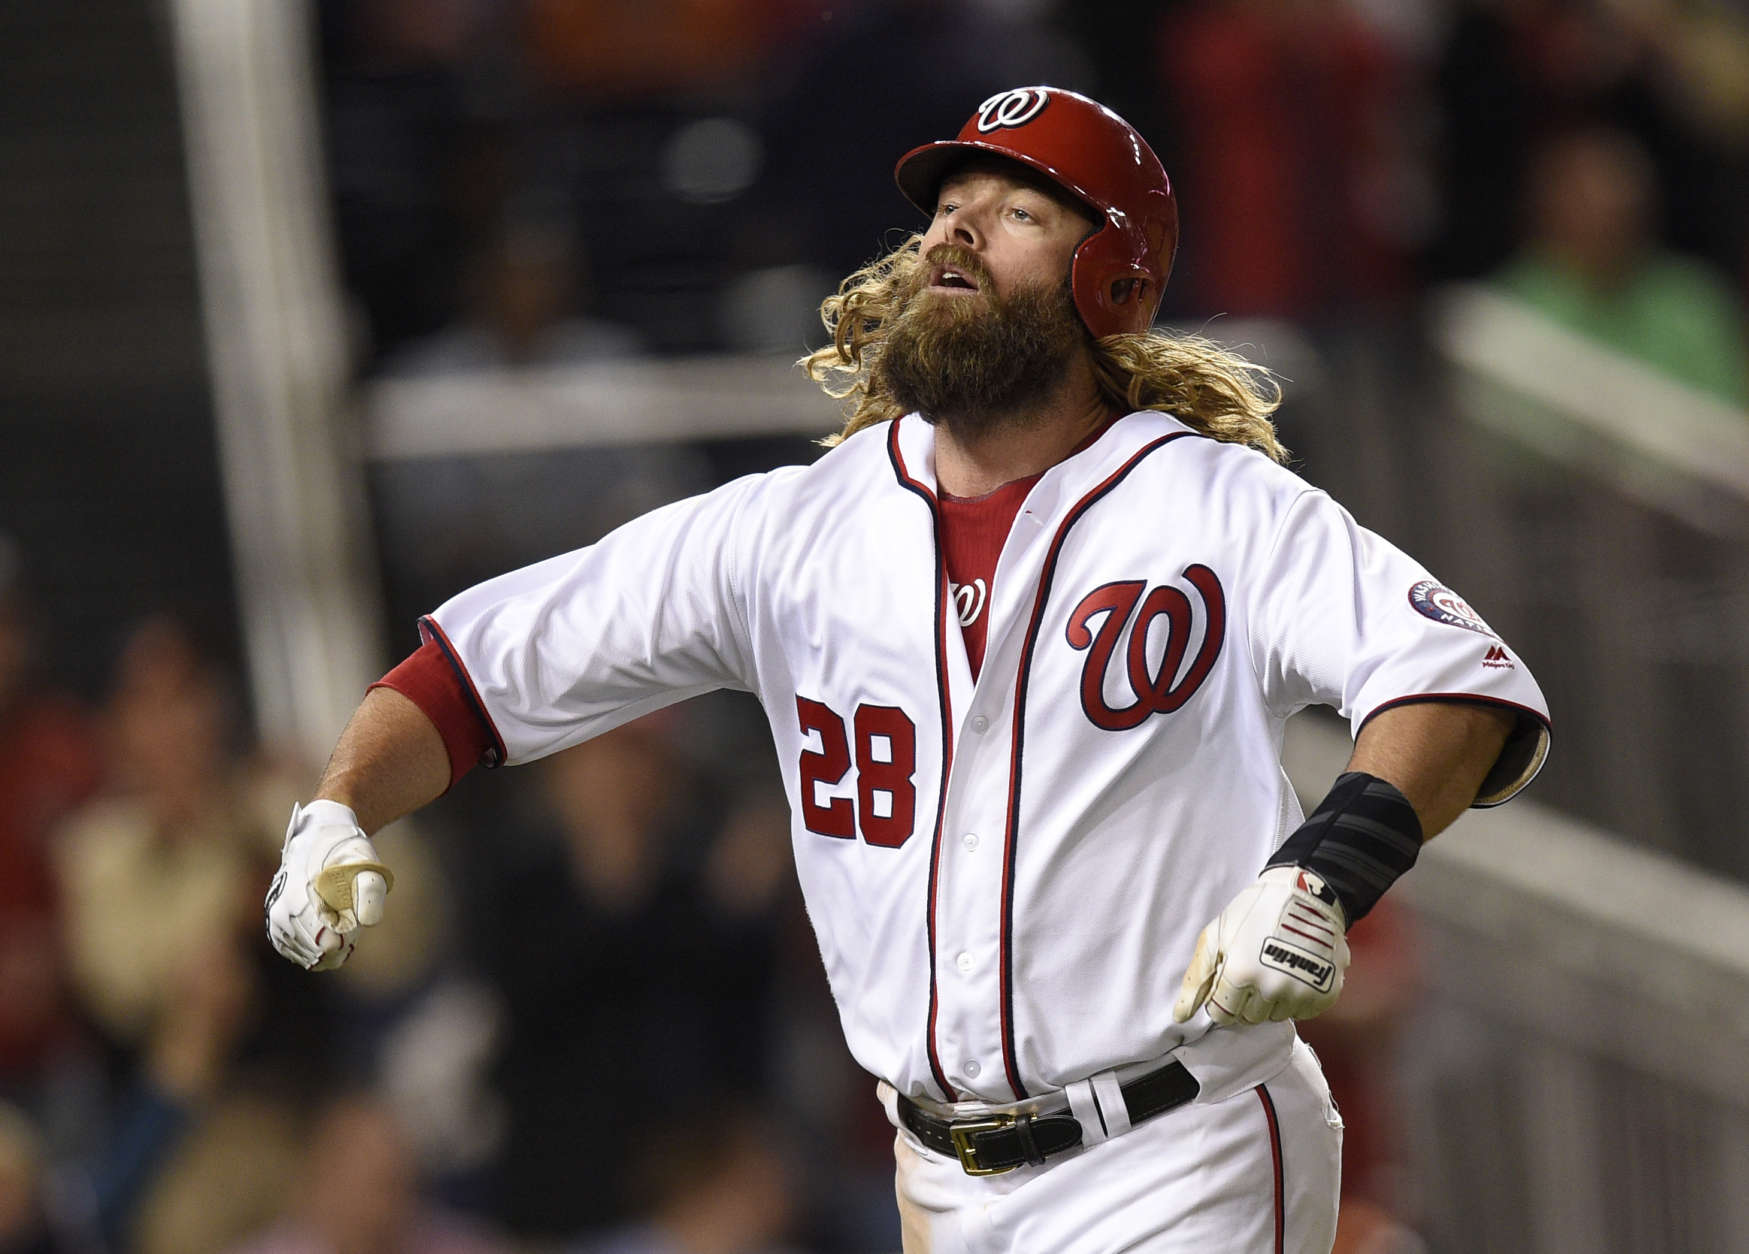 Washington Nationals' Jayson Werth celebrates his home run during the ninth inning of the team's baseball game against the Baltimore Orioles, Wednesday, May 10, 2017, in Washington. The Nationals won 7-6. (AP Photo/Nick Wass)